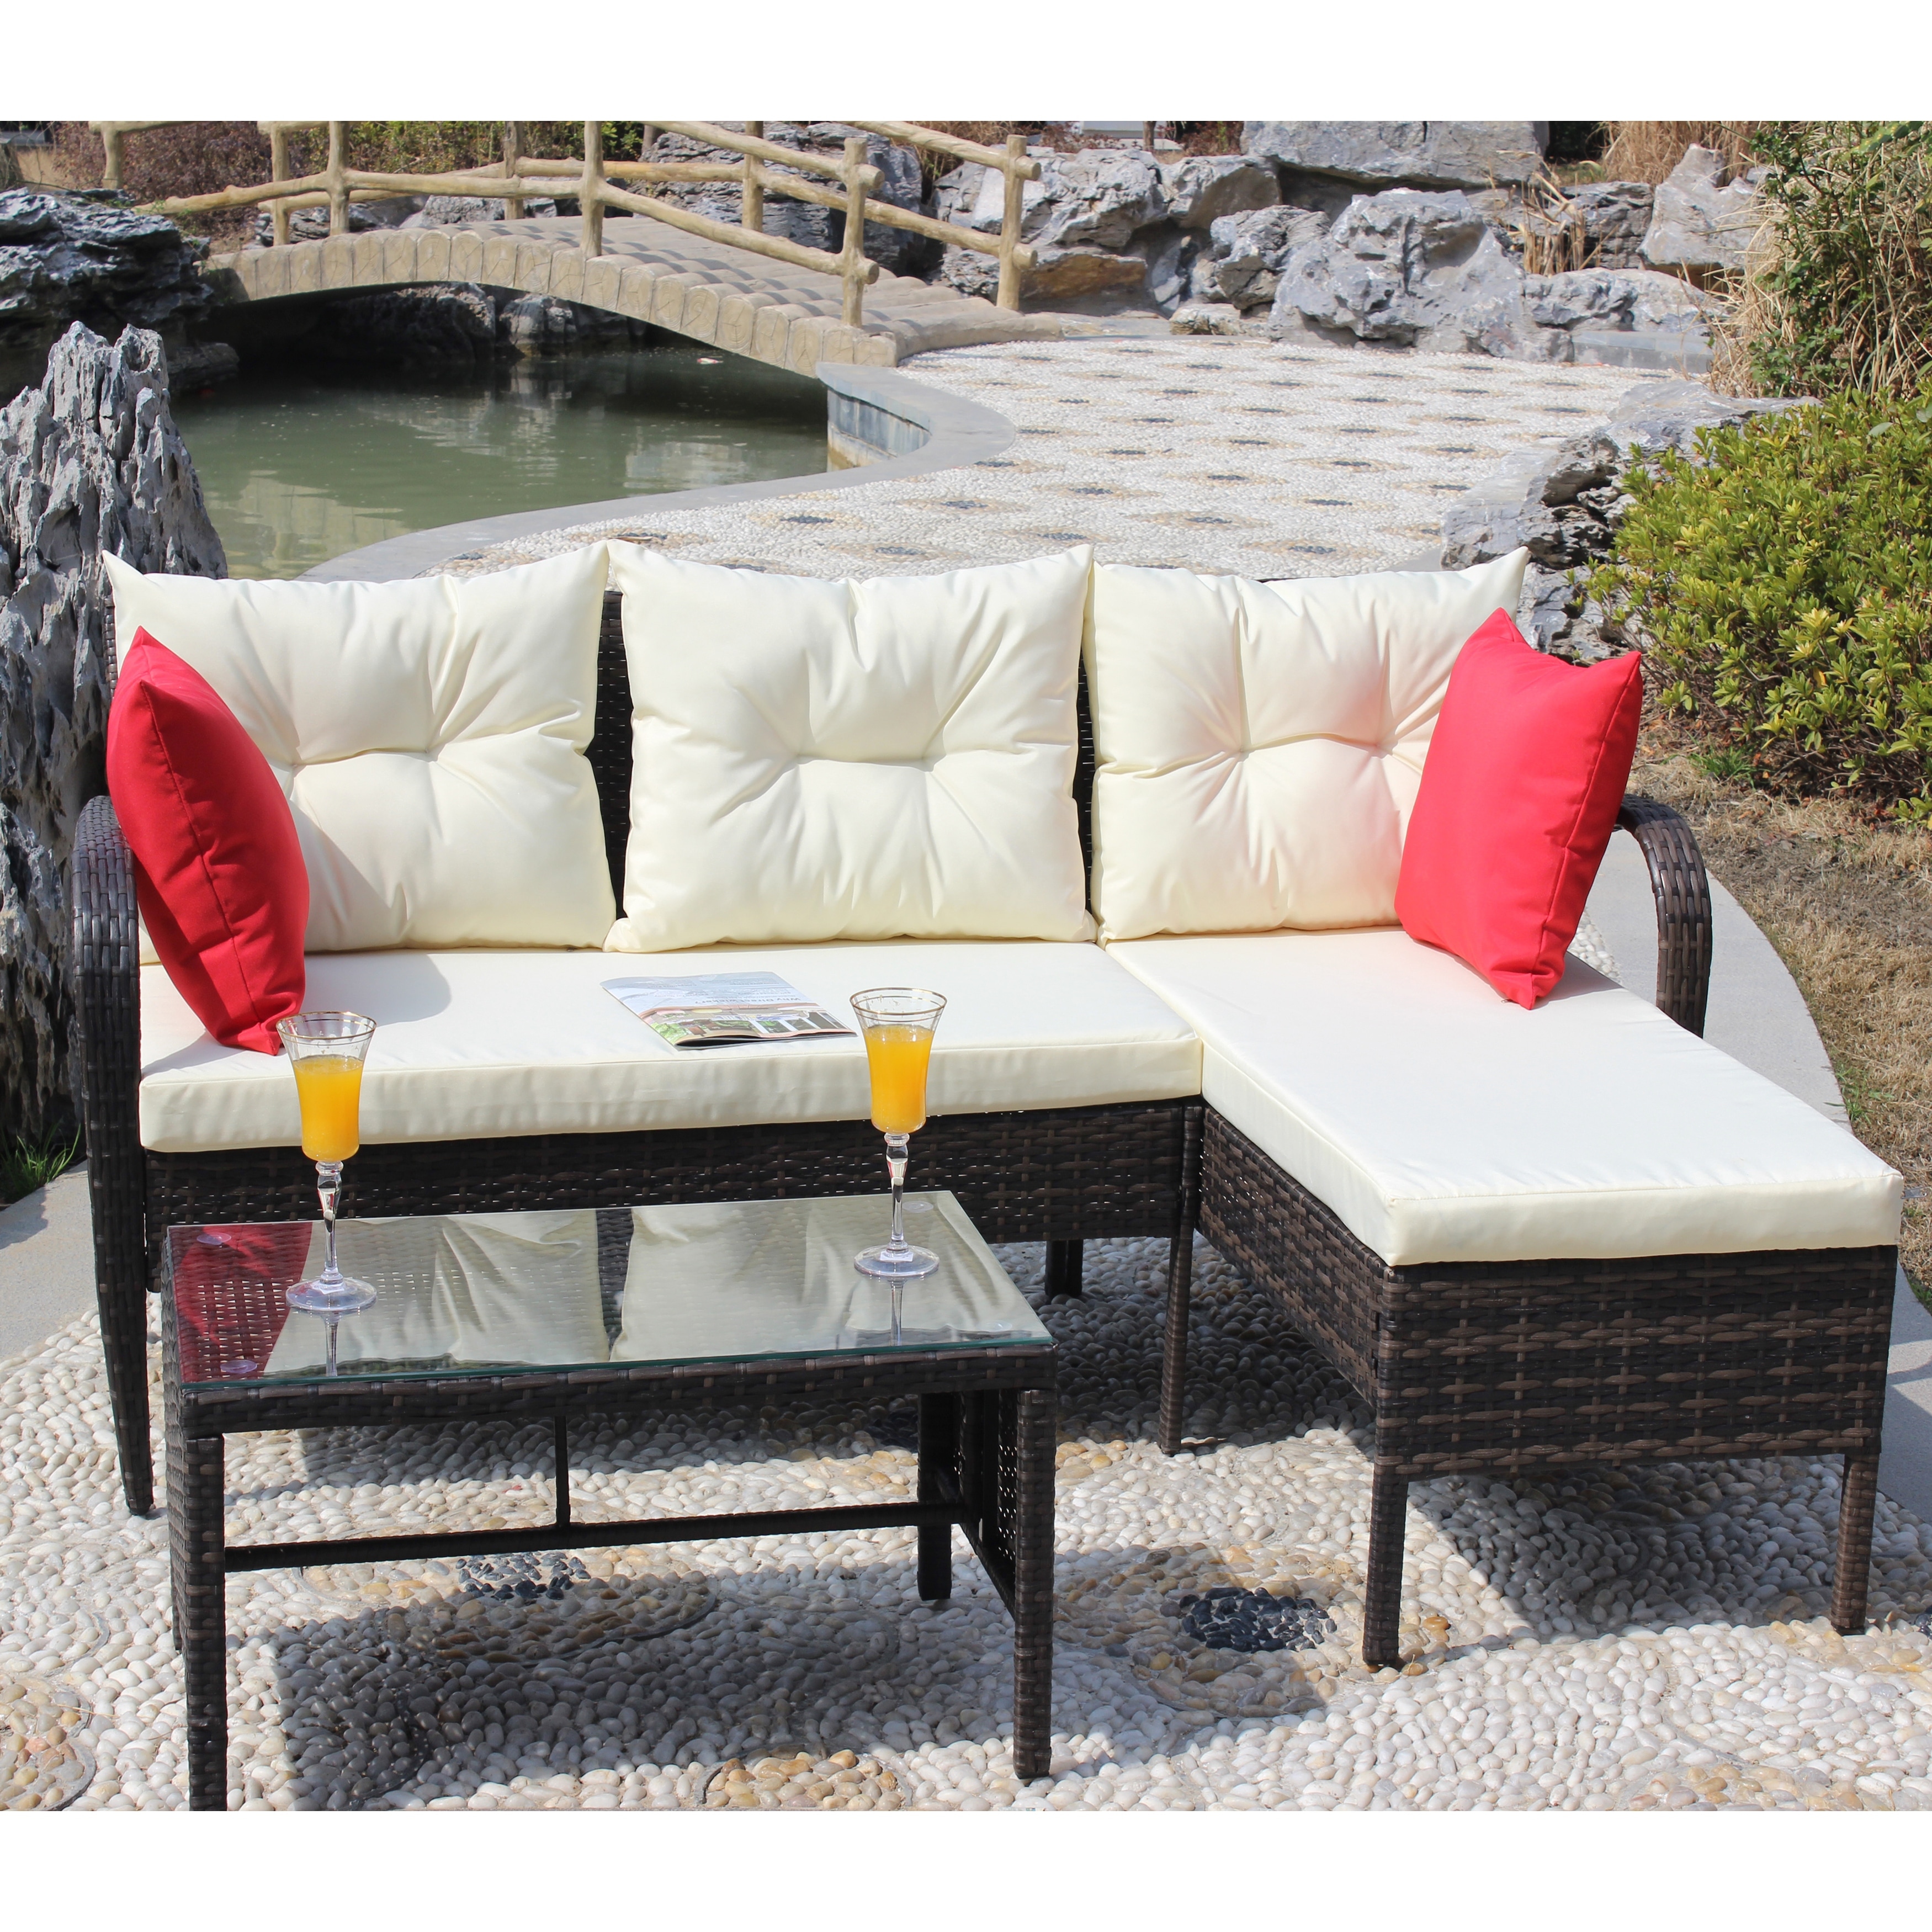 3-Piece Wicker Rattan Outdoor Sectional Sofa Set with Coffee Table, Beige